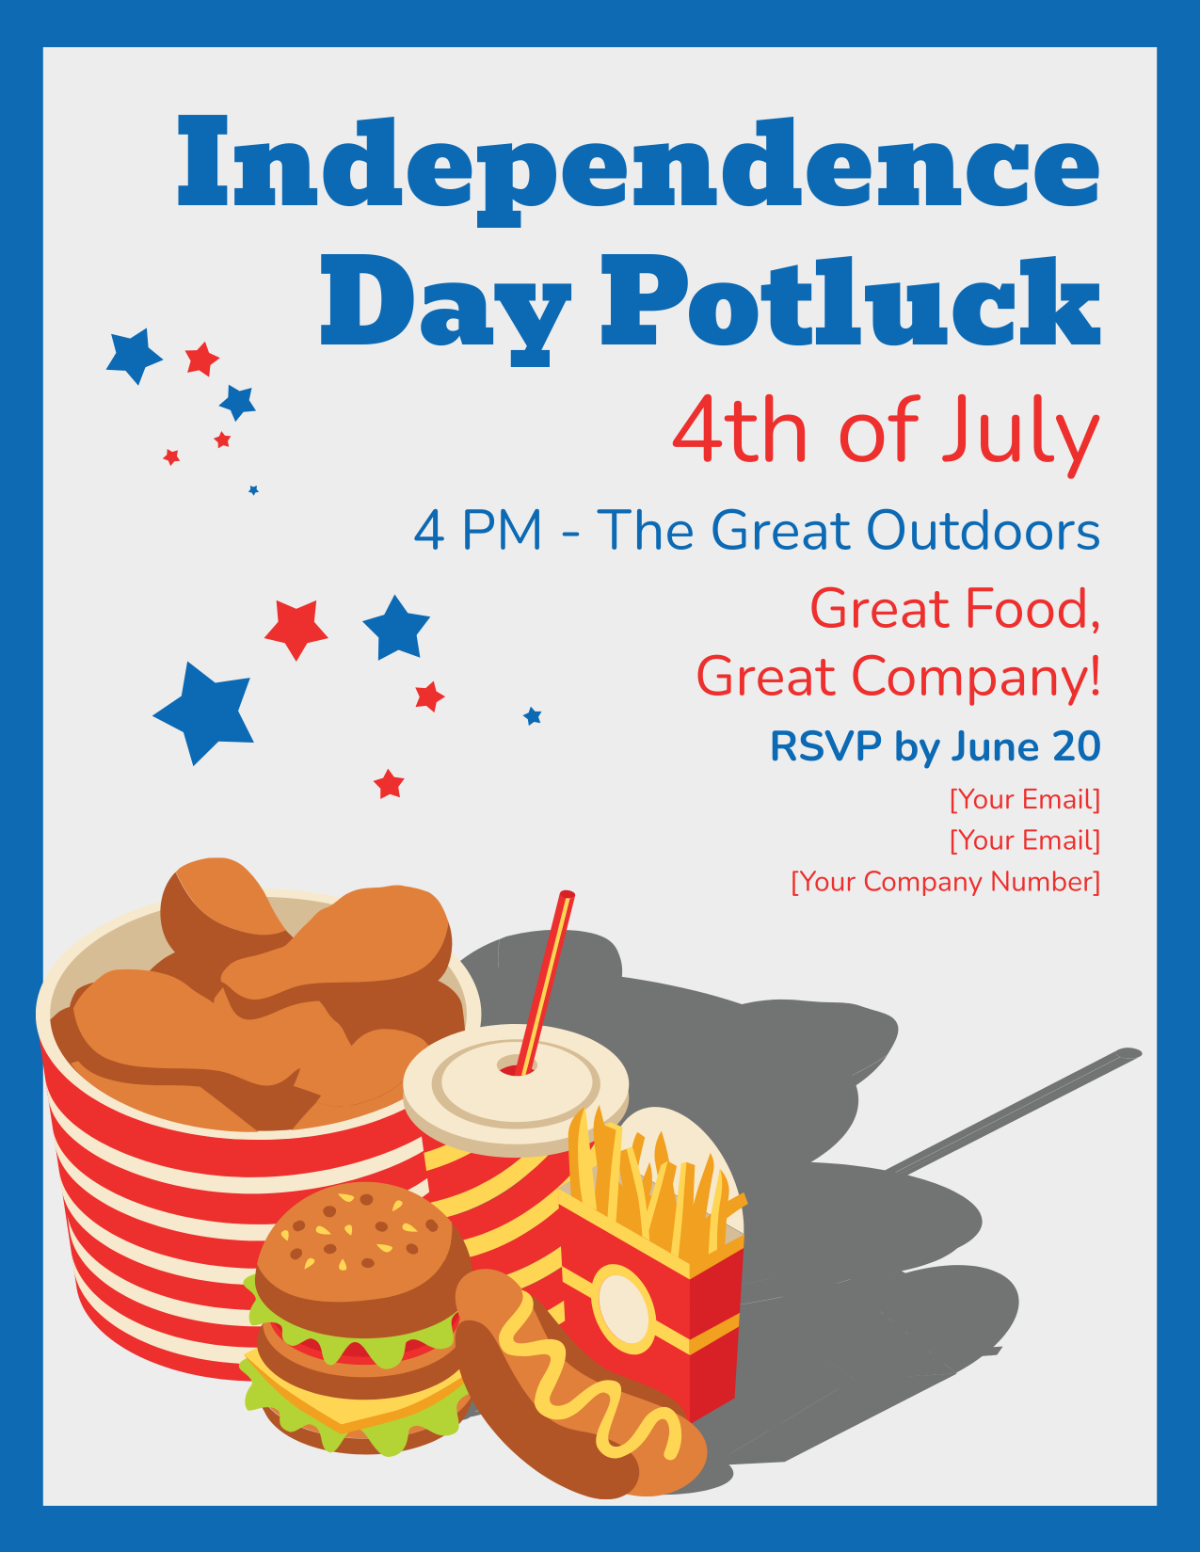 4th of July Potluck Flyer